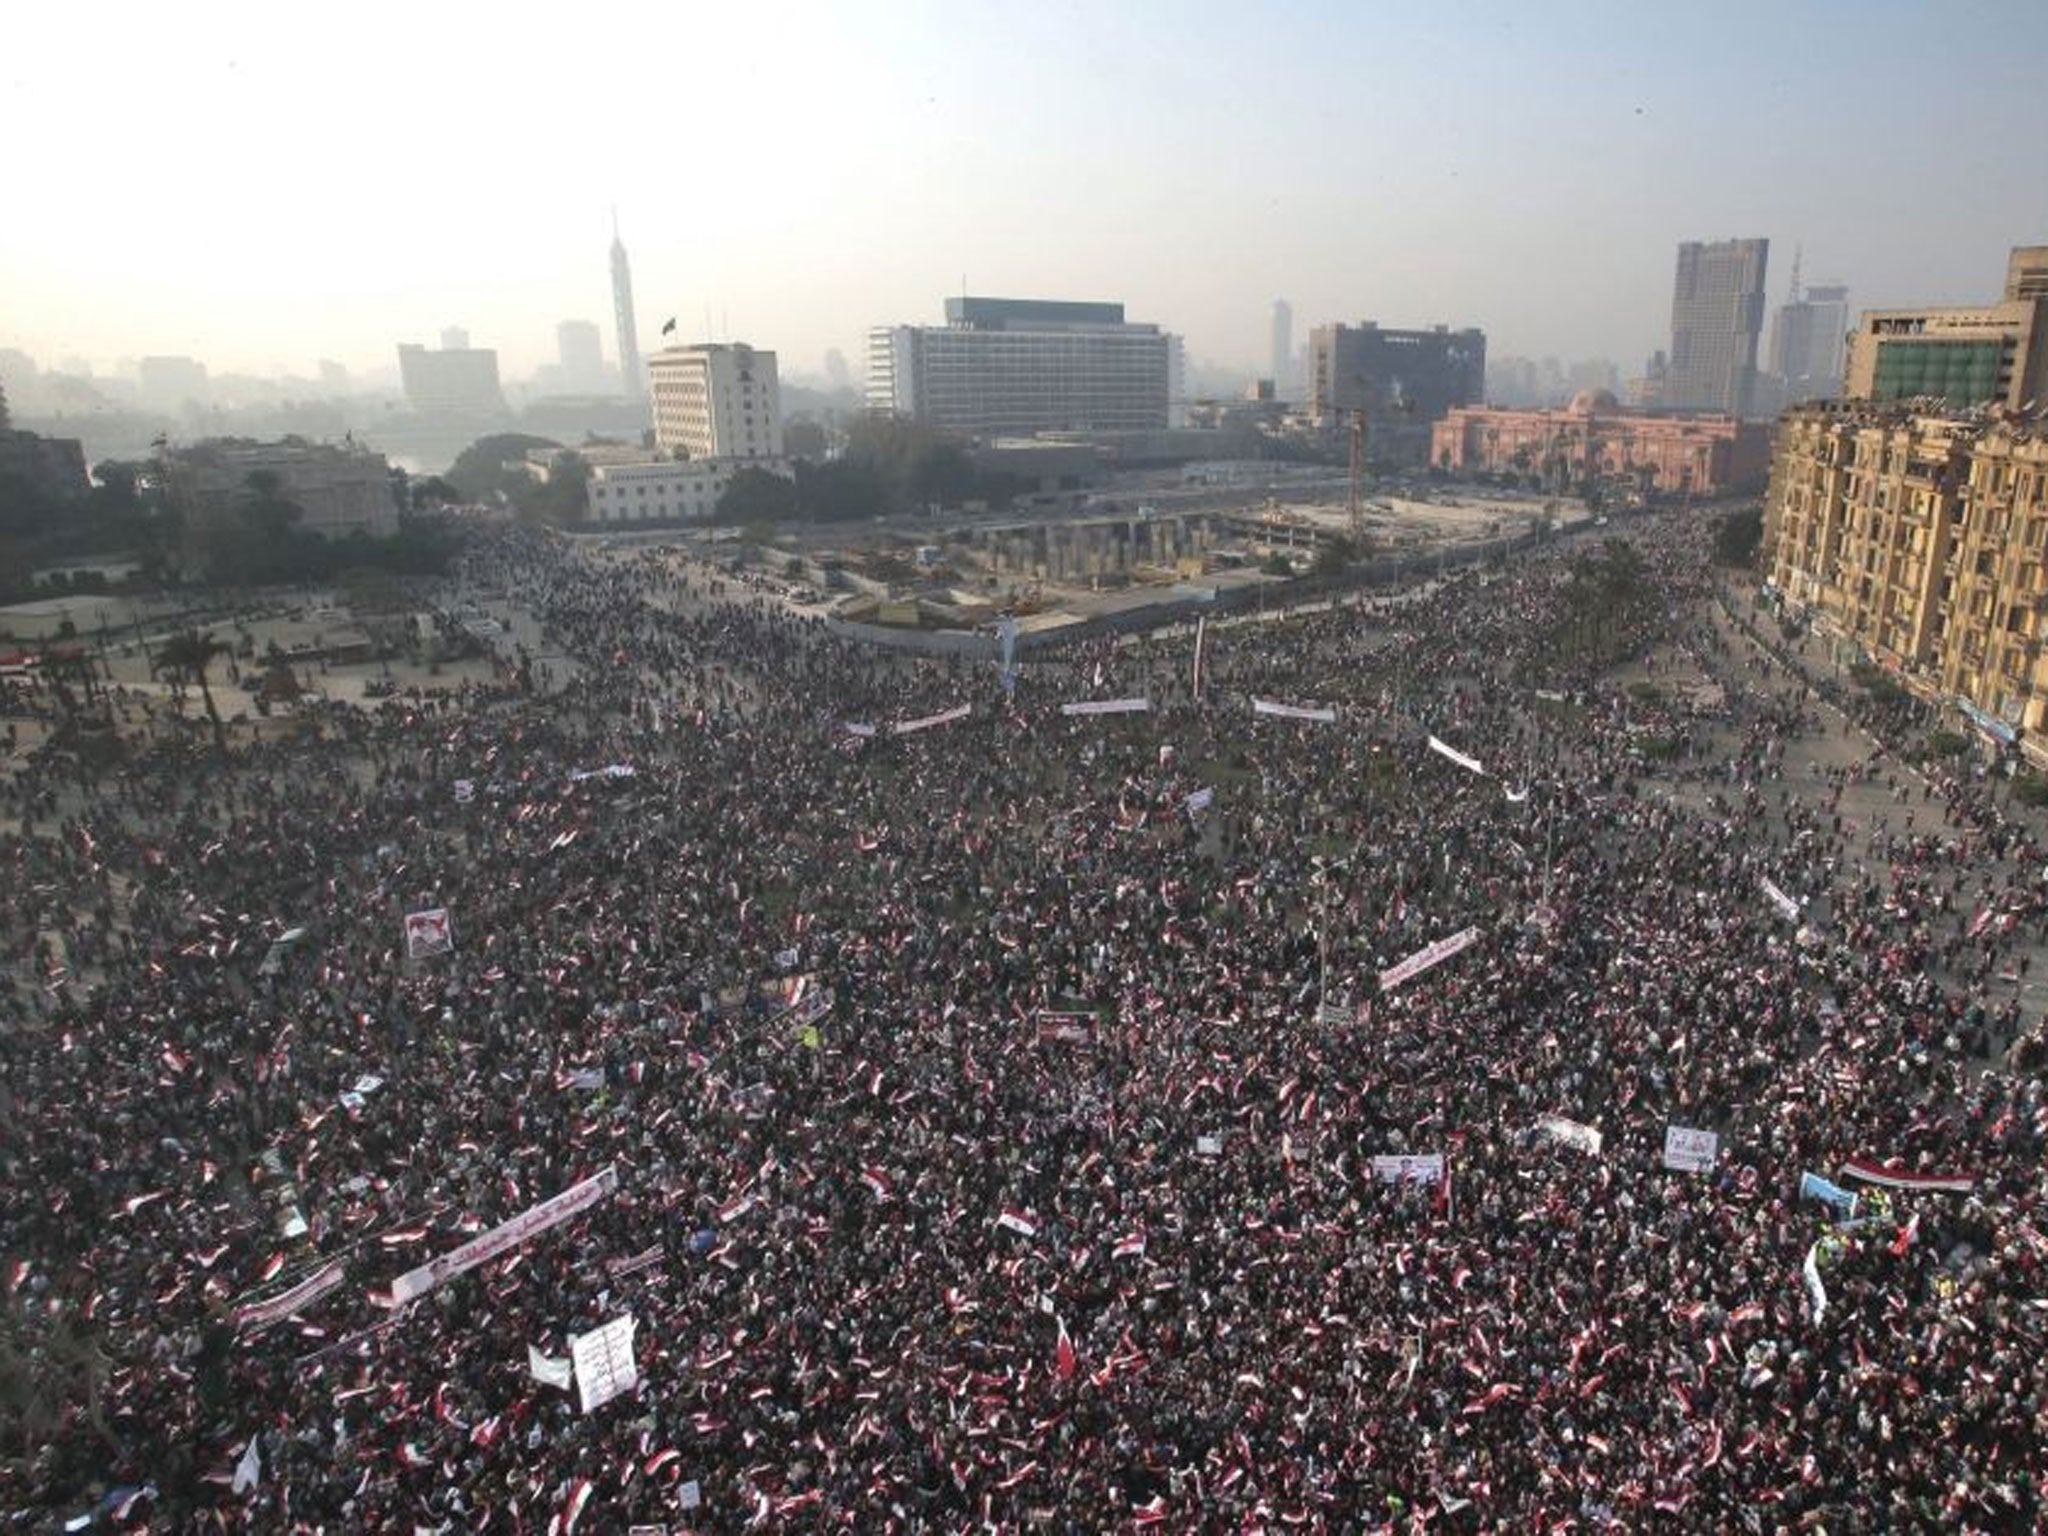 Tahrir Square in Cairo is now enclosed by towering metal gates to avoid protests